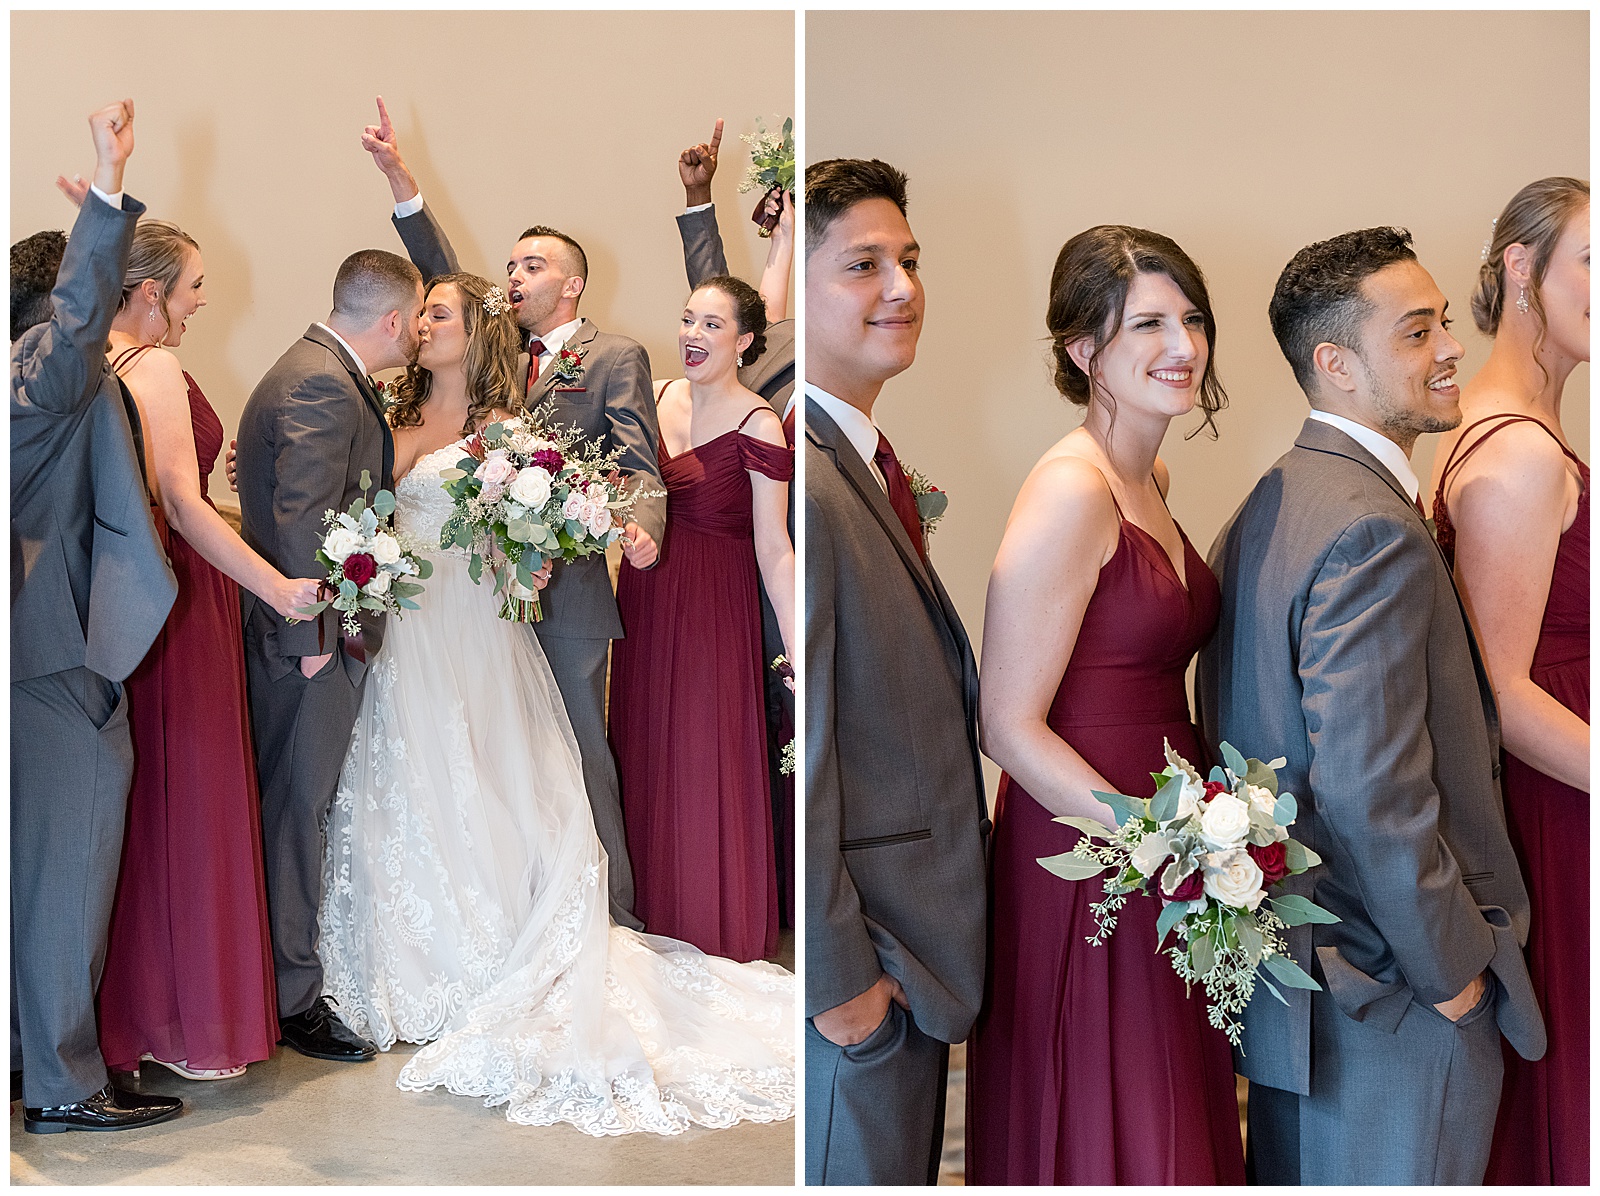 bride and groom kissing as their bridal party surrounds them cheering before wedding ceremony